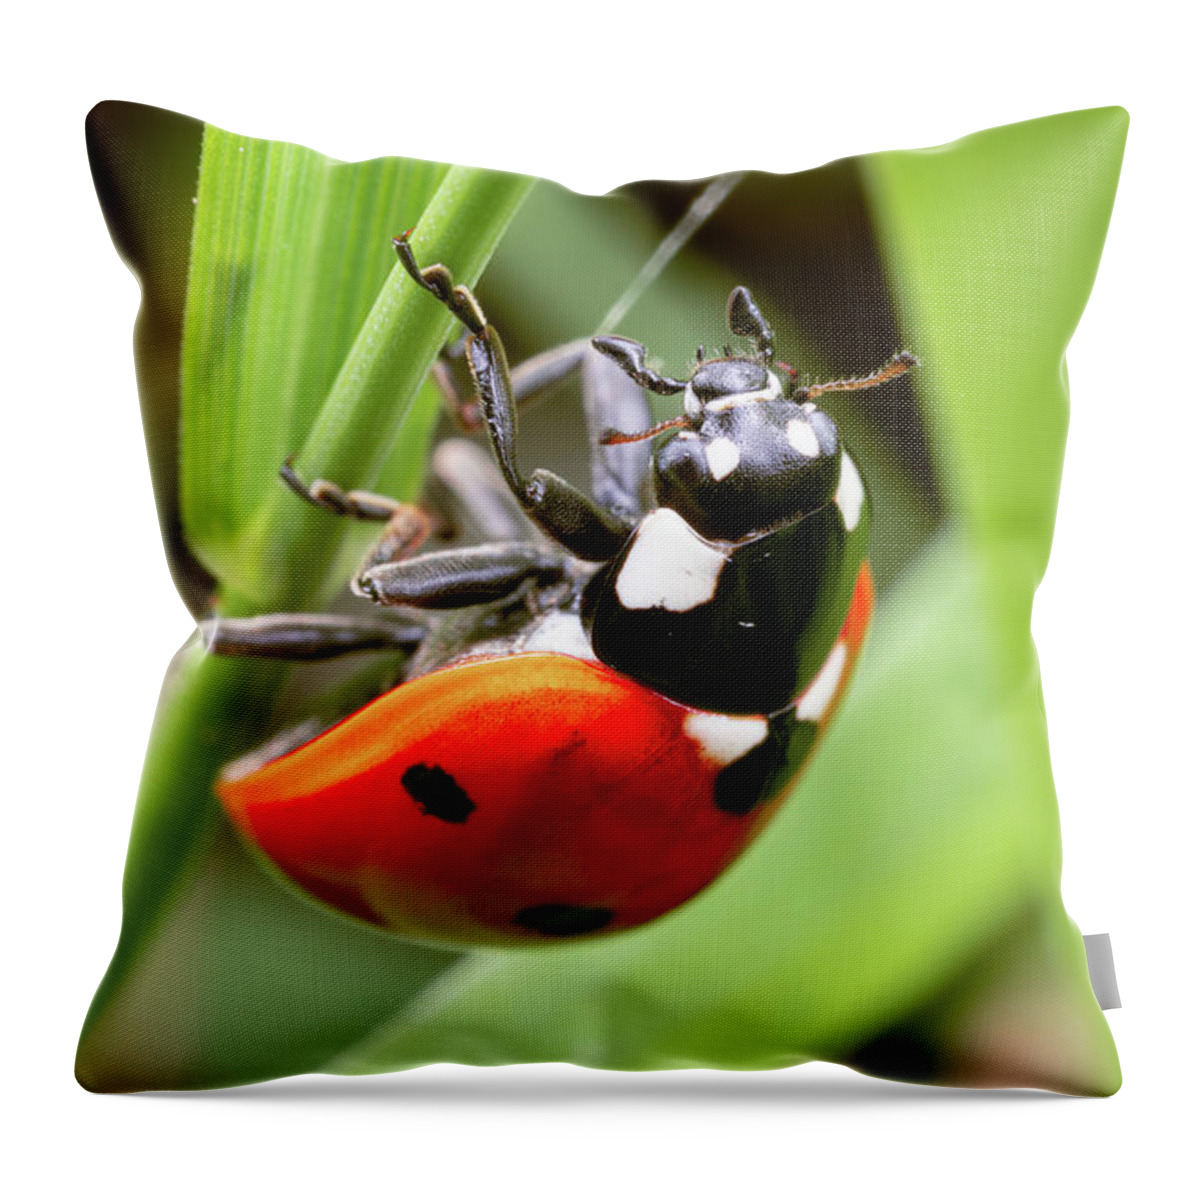 Lady Bug Ladybug Insect Close Up Closeup Close-up Macro Outside Outdoors Nature Brian Hale Brianhalephoto Throw Pillow featuring the photograph Reach Like A Lady by Brian Hale